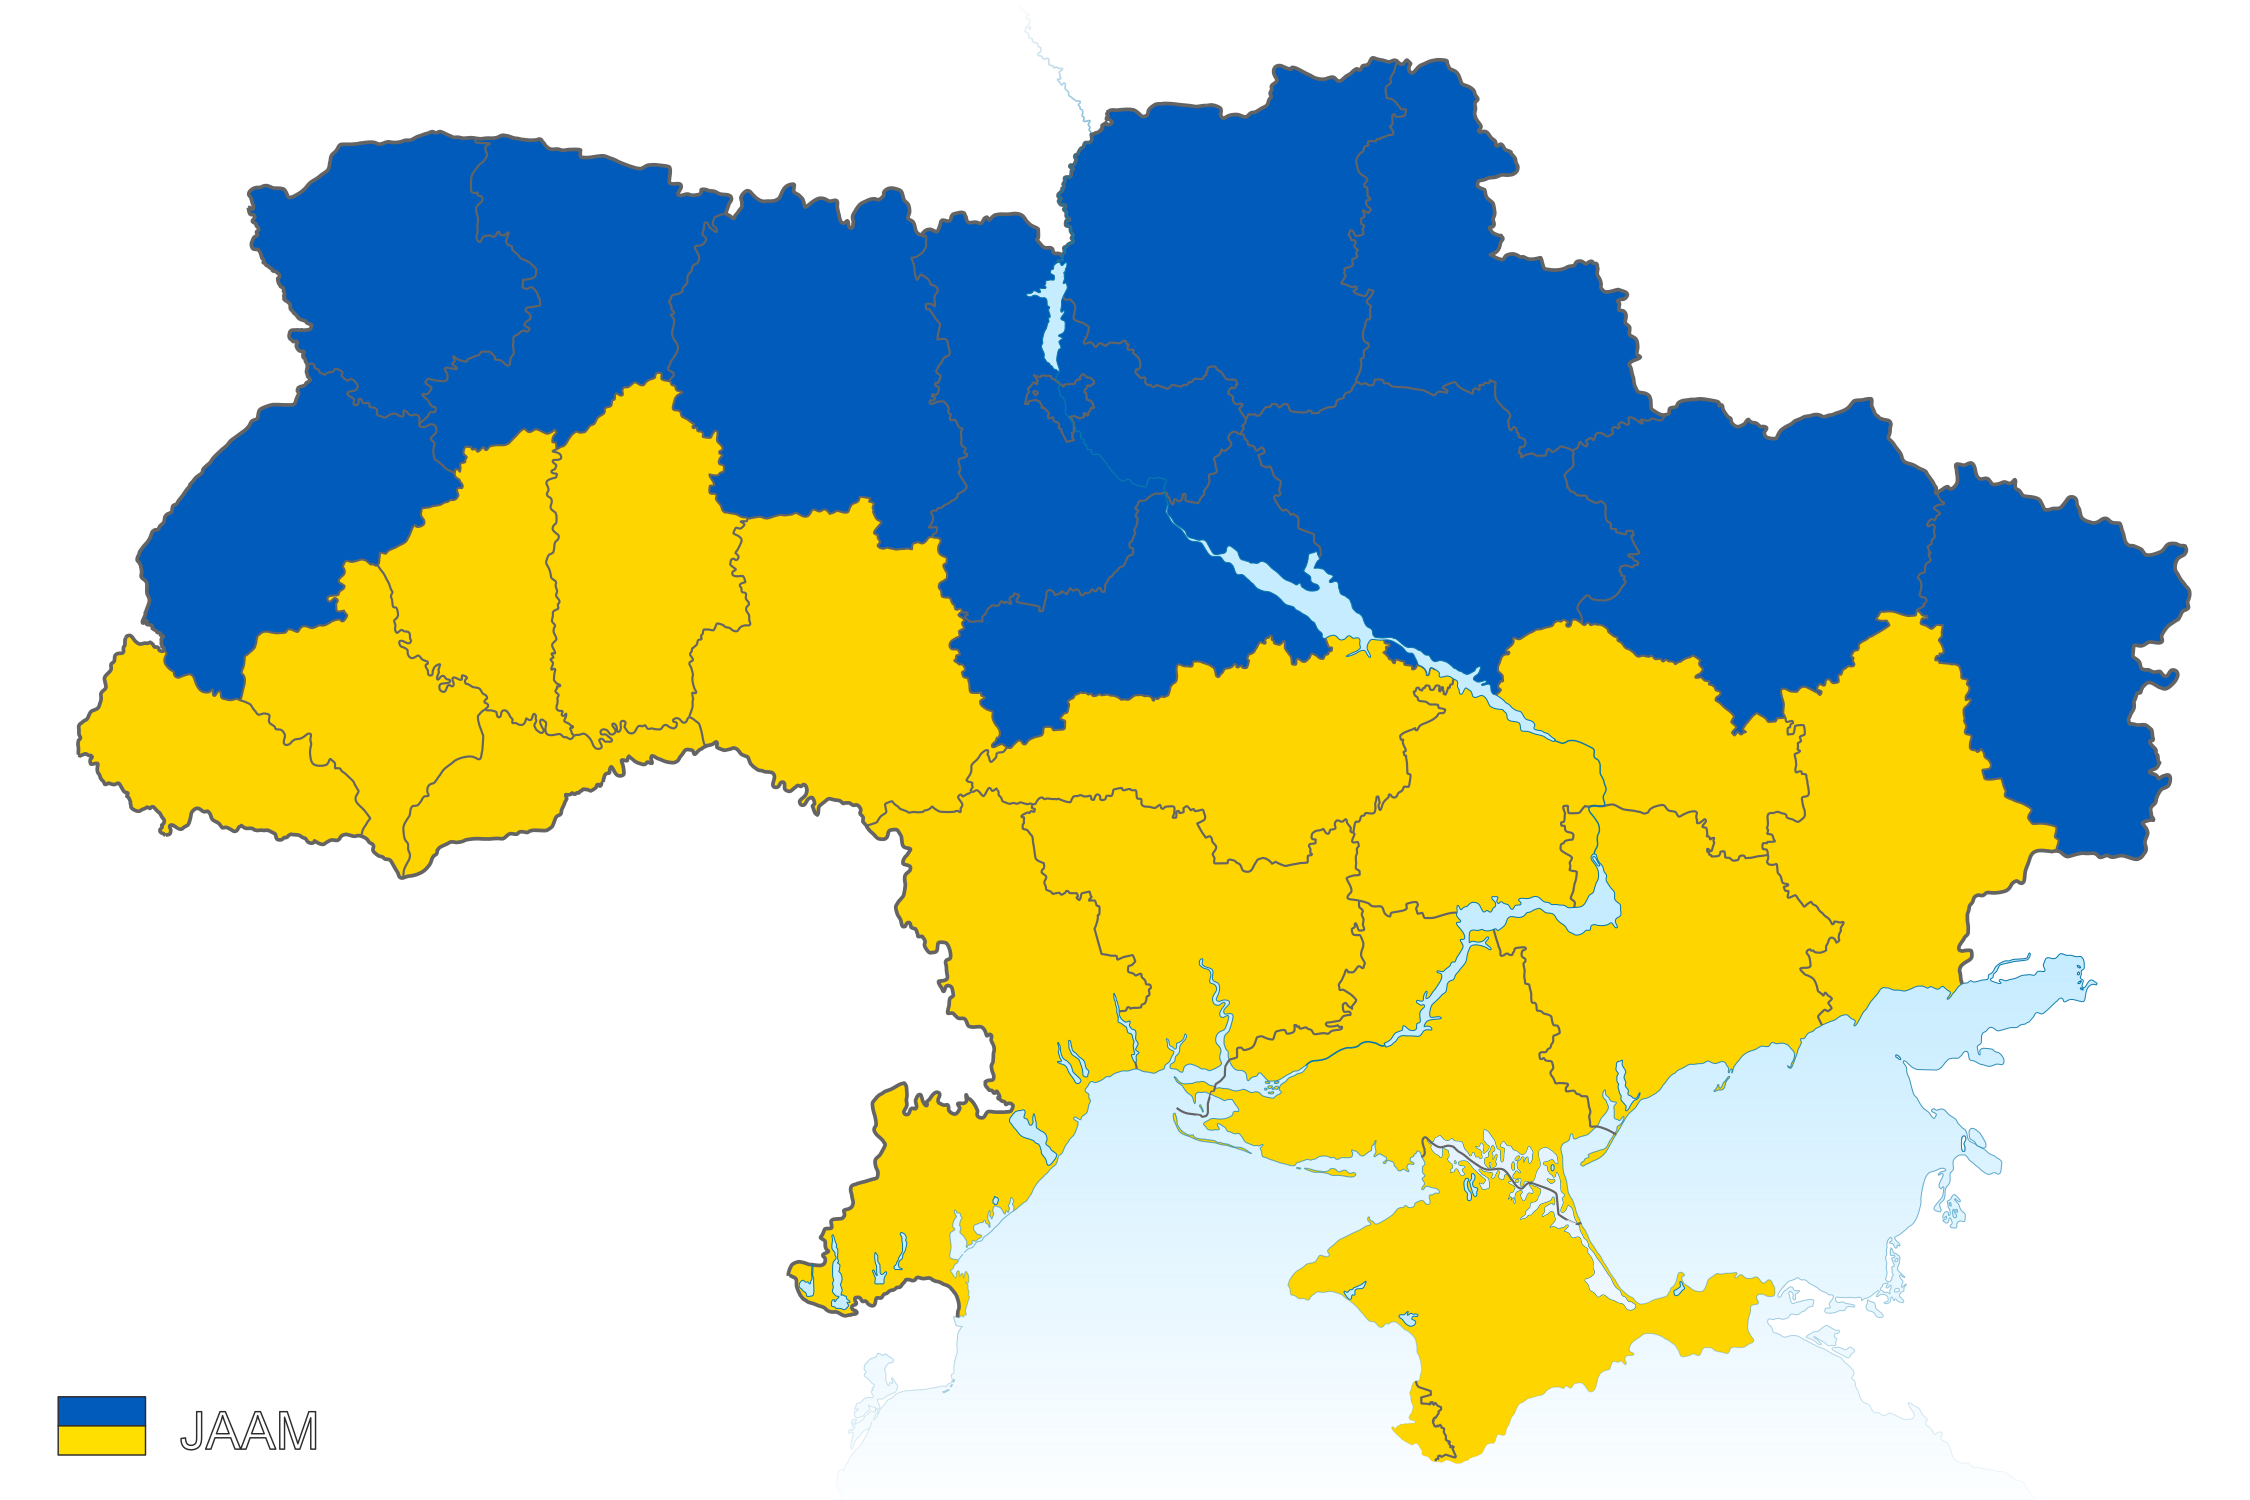 Map of Ukraine colored with national flag colors